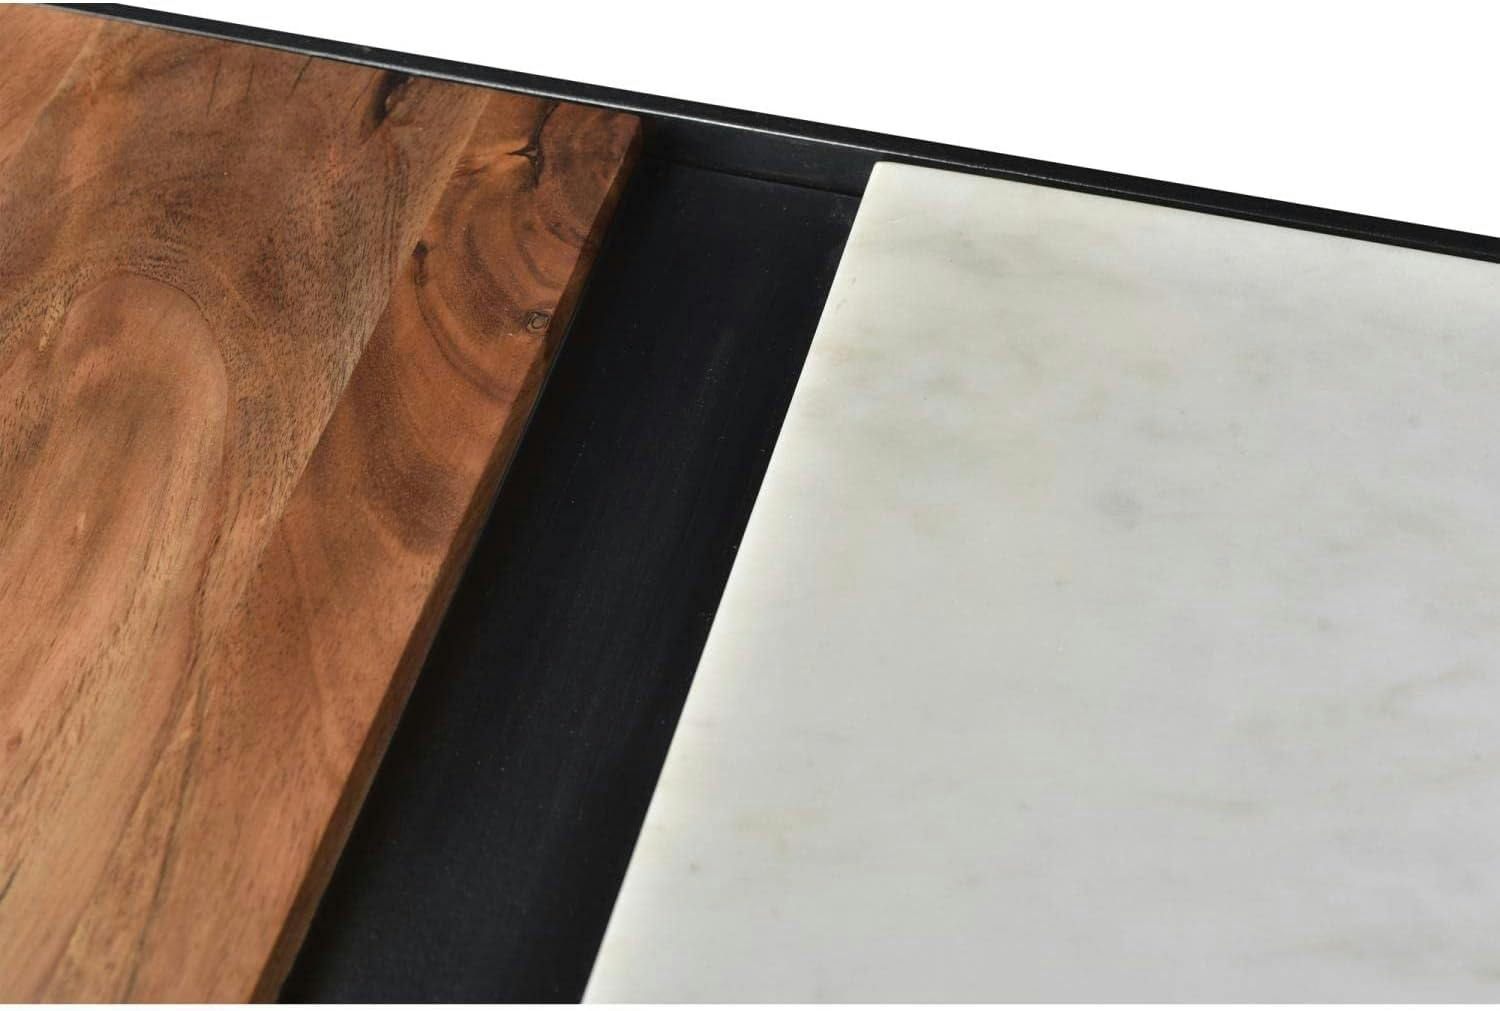 Aramis 50" Marble Top Console Table